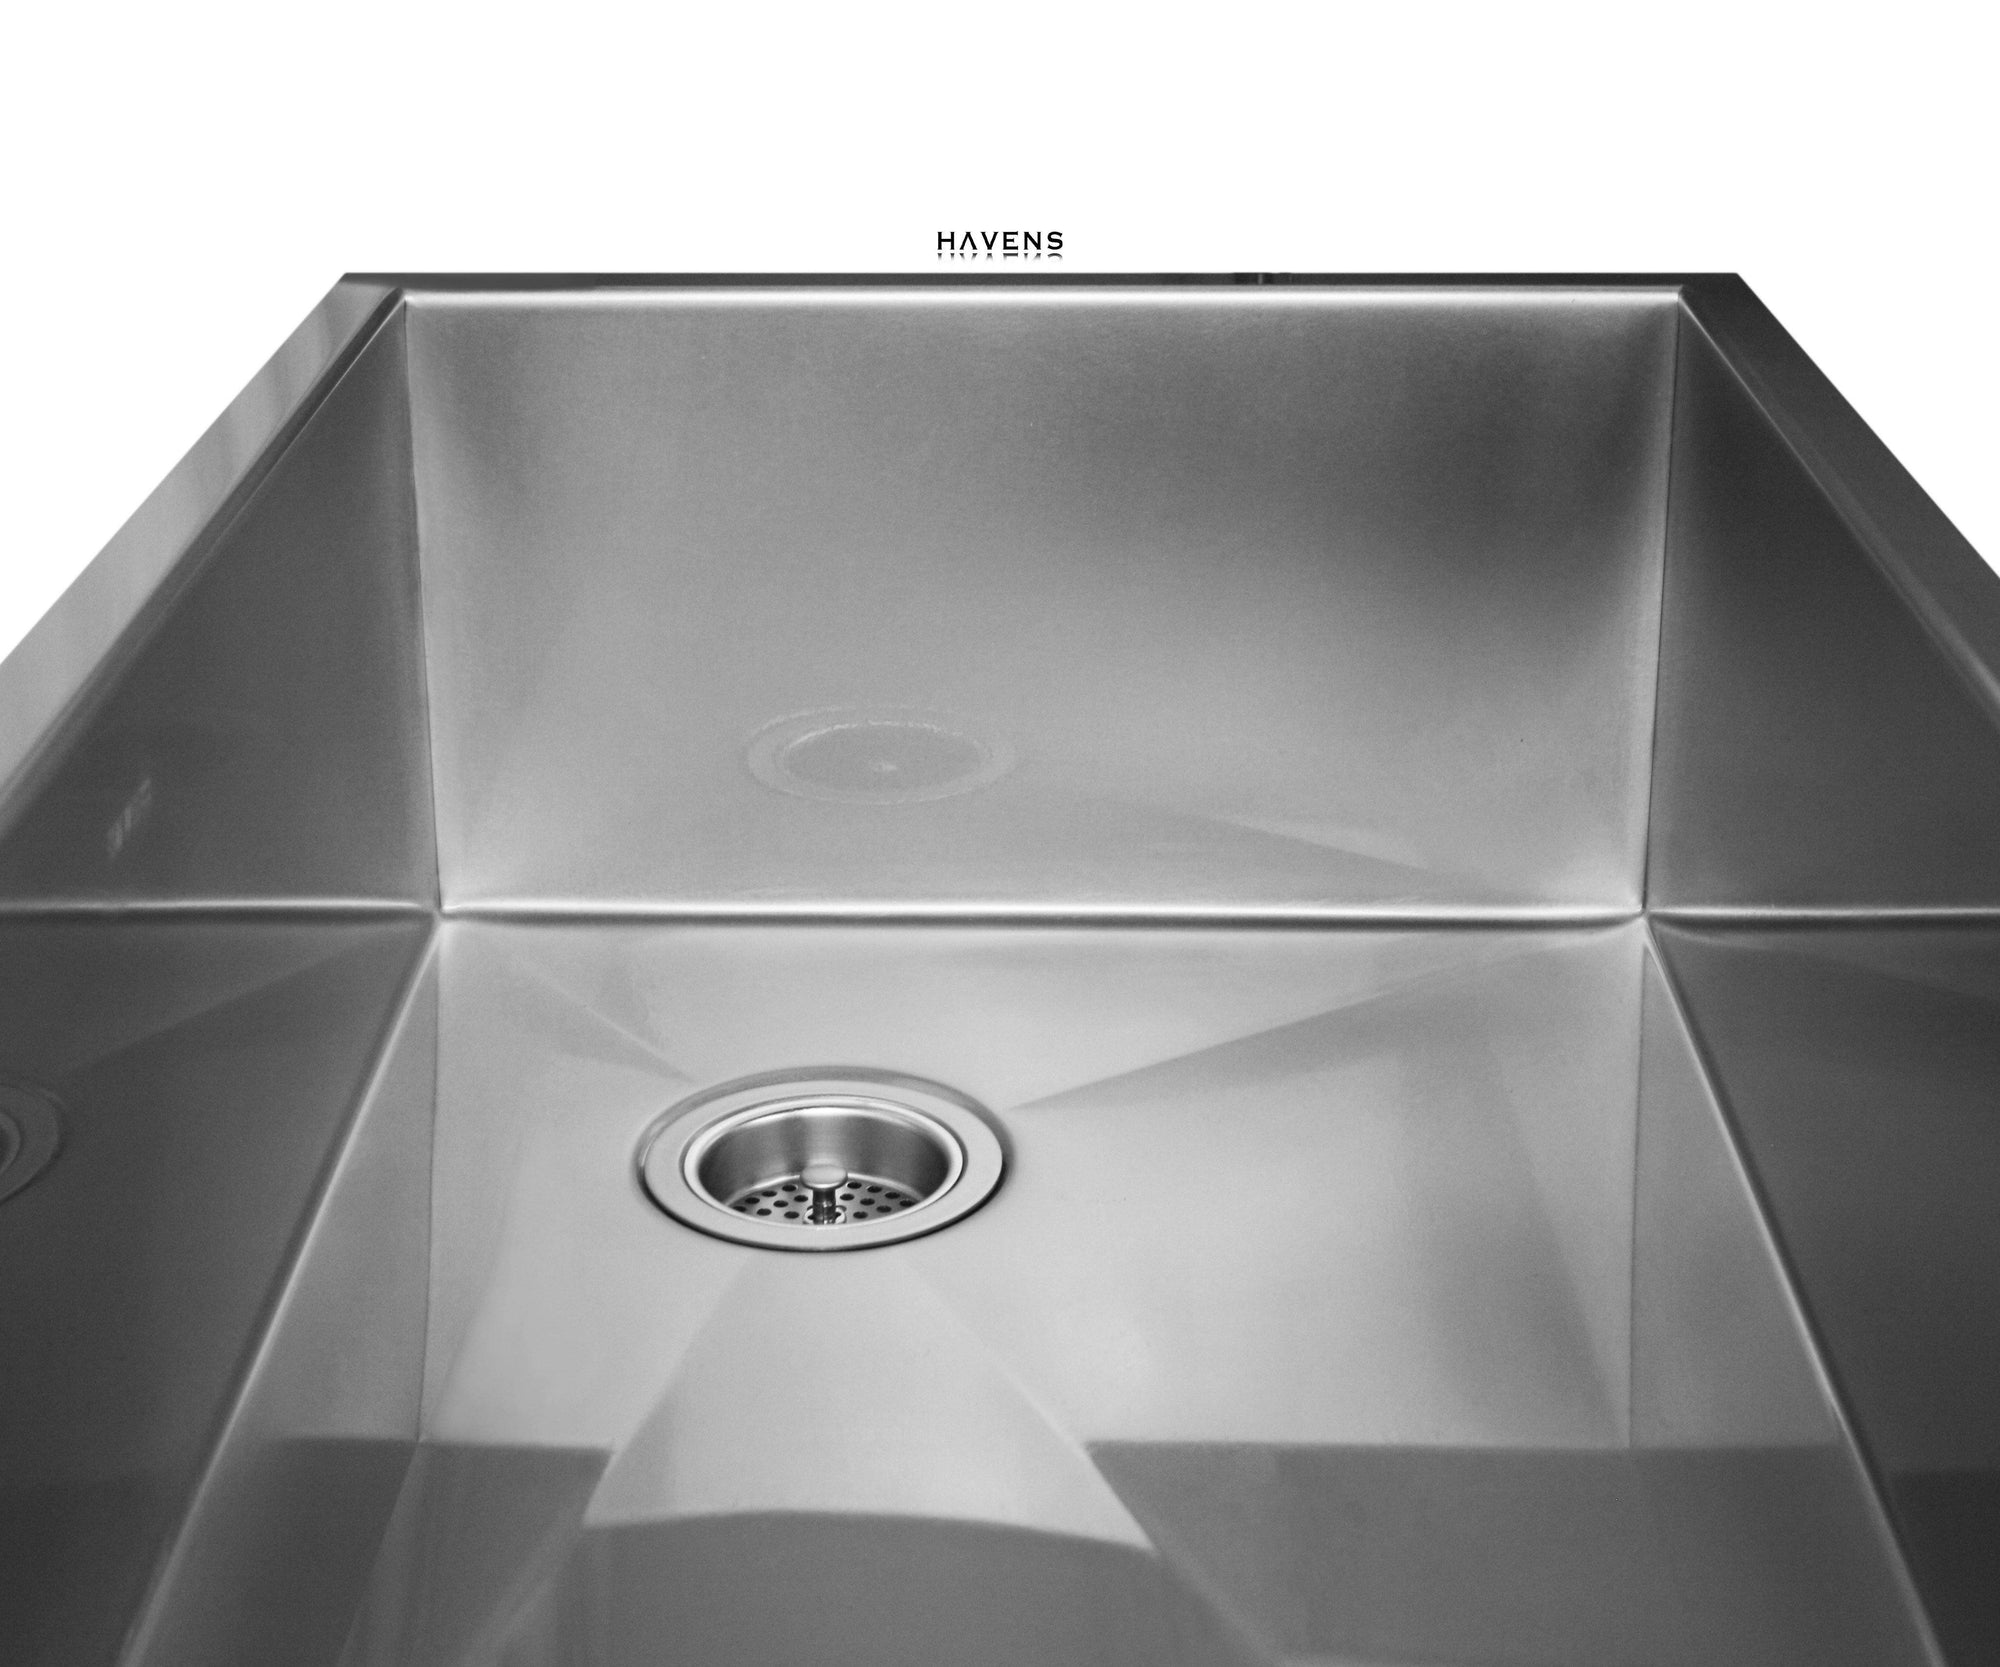 Undermount stainless steel kitchen sink with a right rear drain placement.